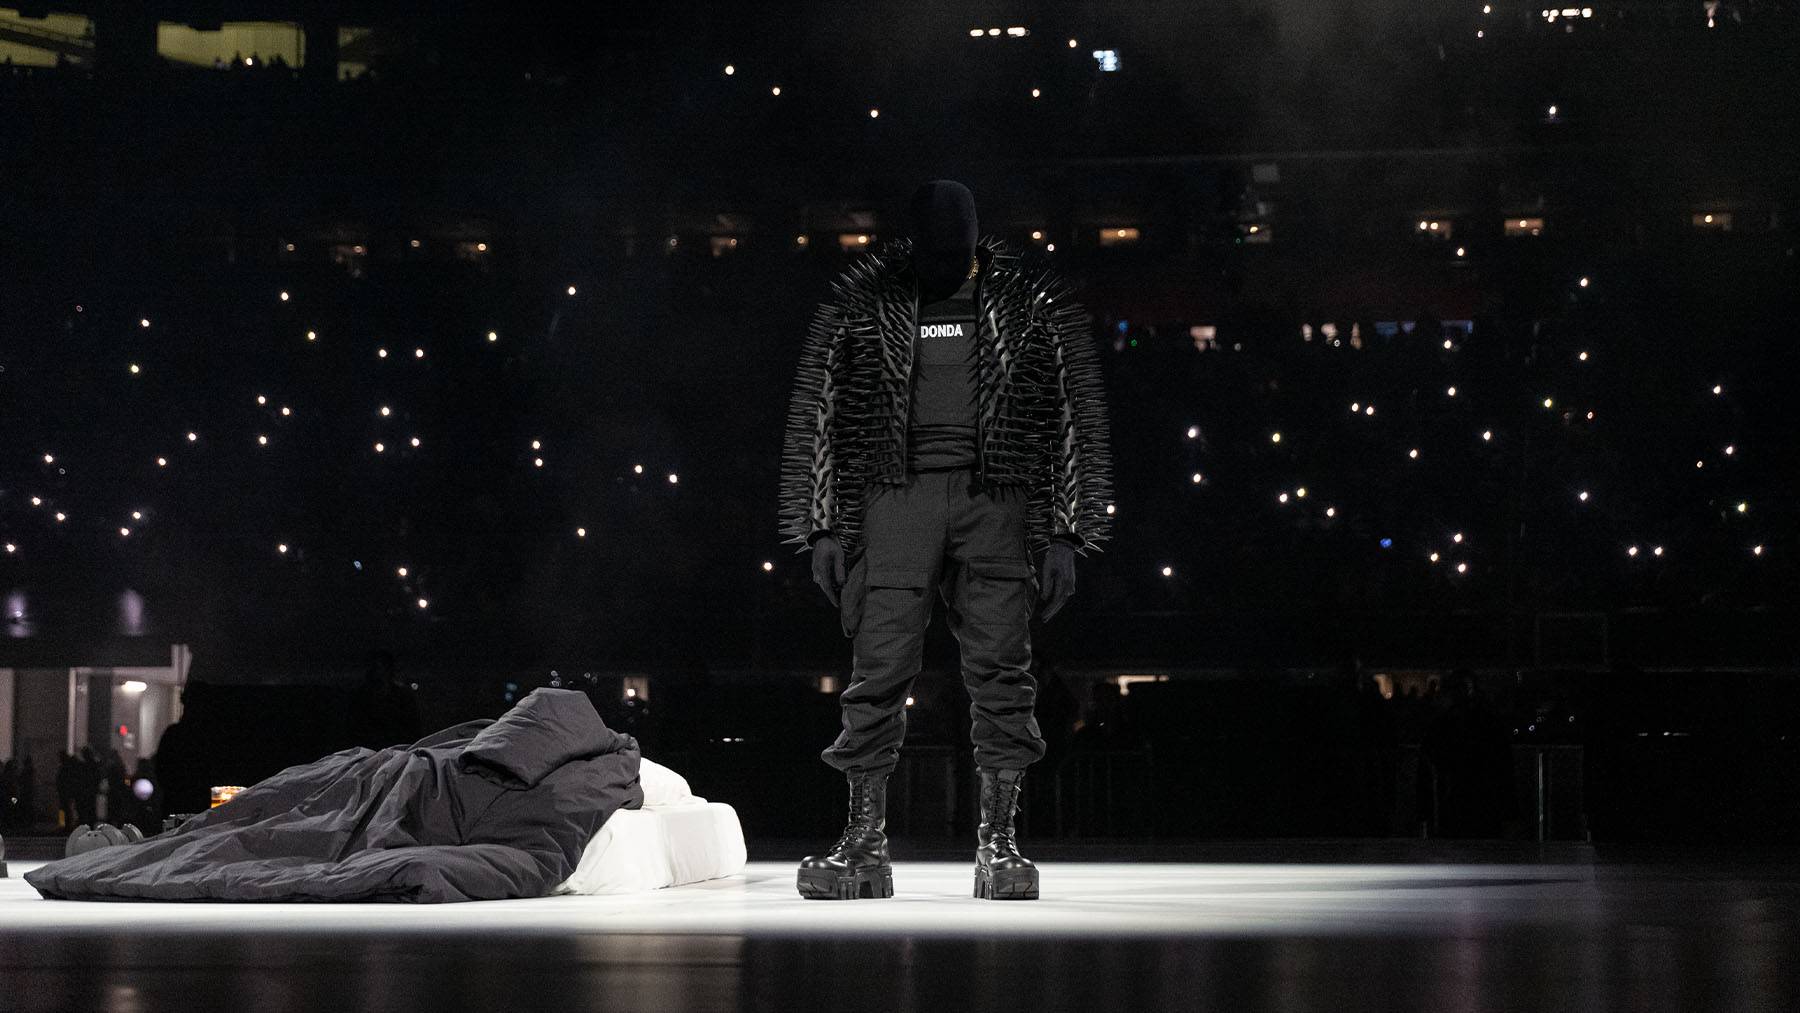 Kanye West on stage for his show in collaboration with Demna Gvasalia of Balenciaga. Courtesy.